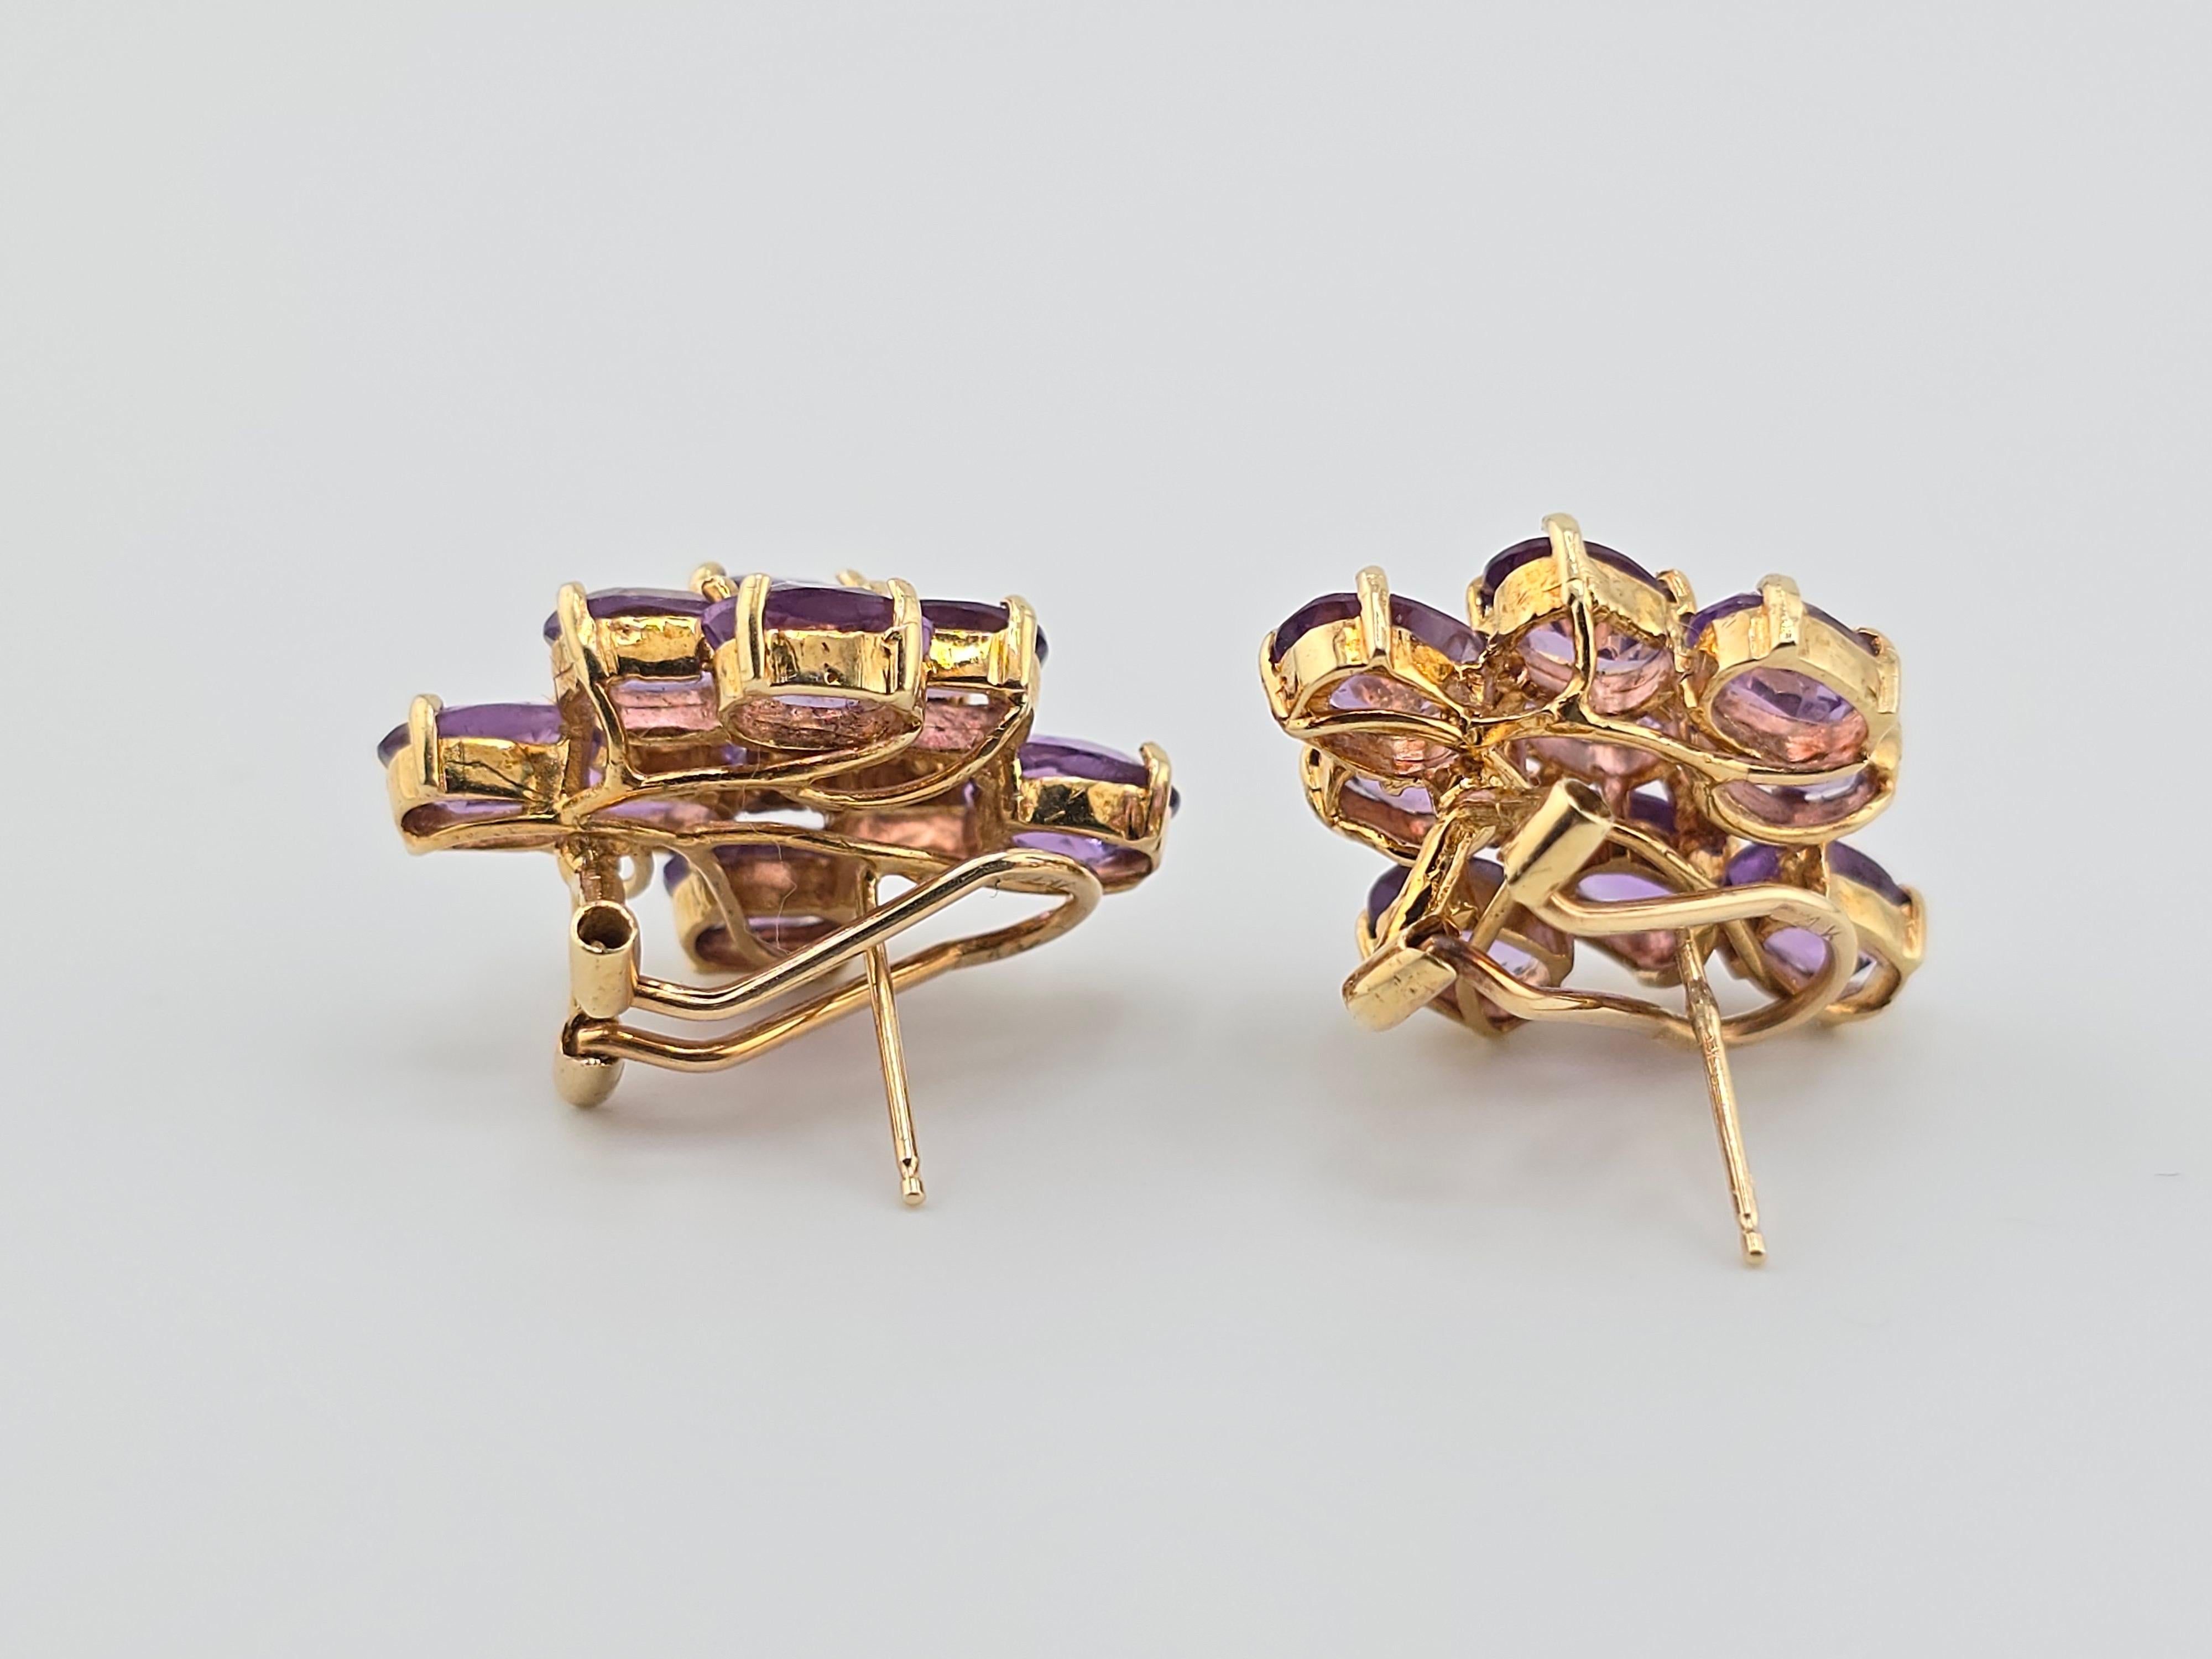 Exceptional 14K Yellow Gold Earrings with Amethyst Omega Clip Backs  For Sale 1